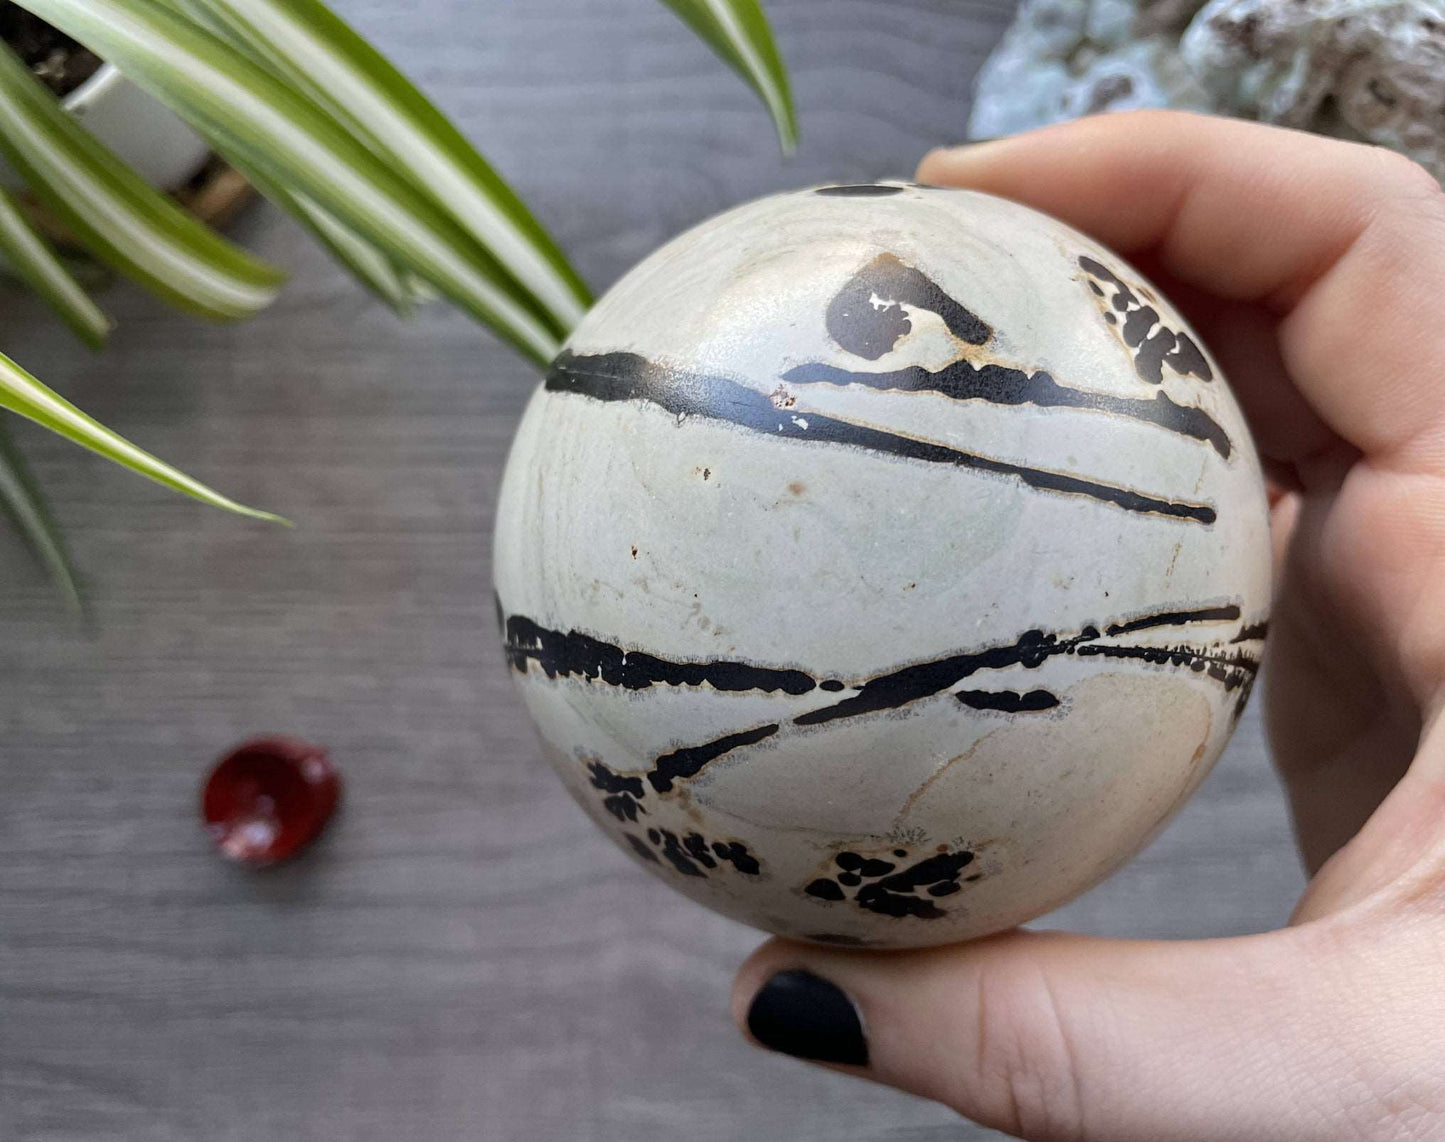 Pictured is a sphere carved out of Chinese painting stone.